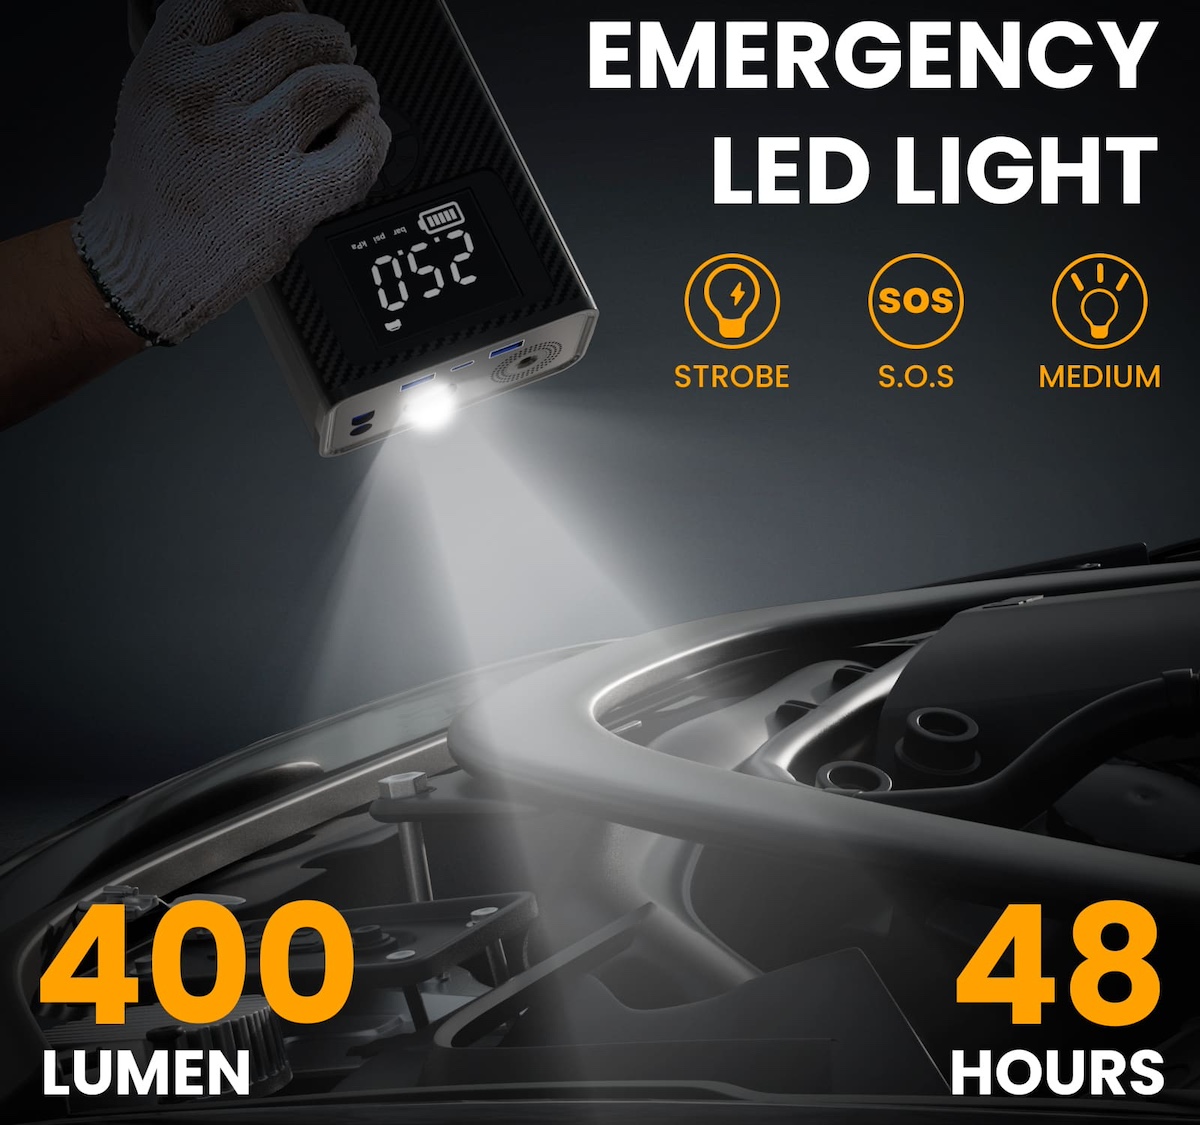 power bank with a capacity of 8000 mAh and led flashlight car starter